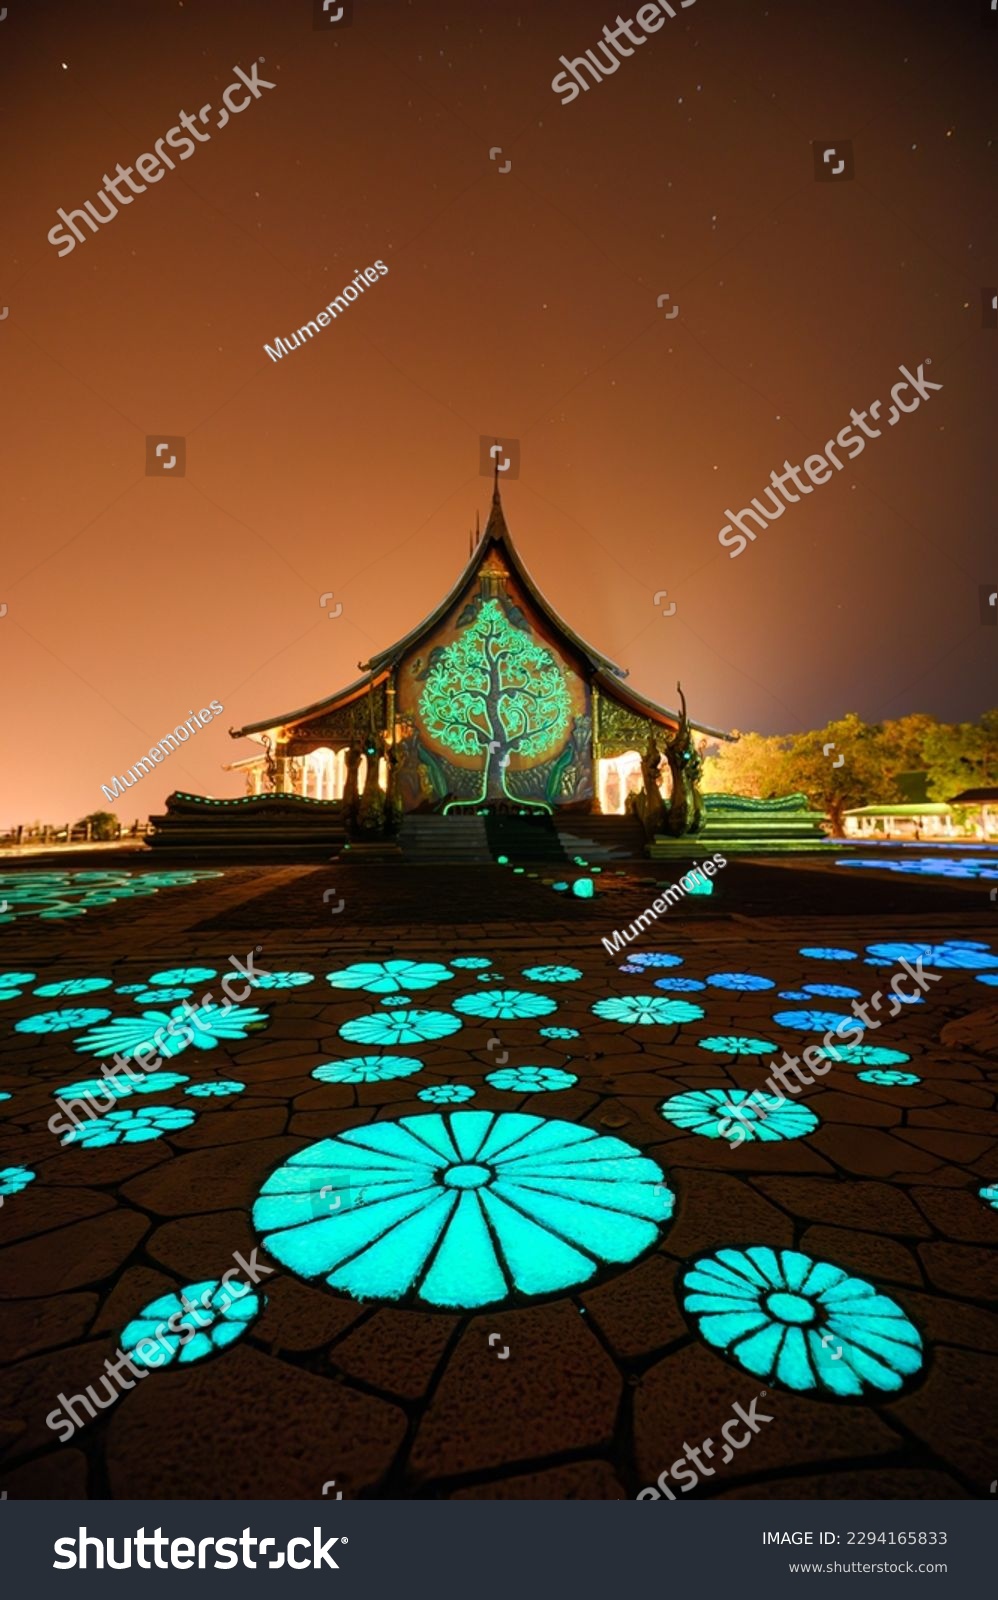 Beautiful architecture of Church temple with bodhi tree glowing and fluorescence lotus painting on the floor at Wat Sirindhorn Wararam or Wat Phu Prao at Ubon Ratchathani, Thailand #2294165833